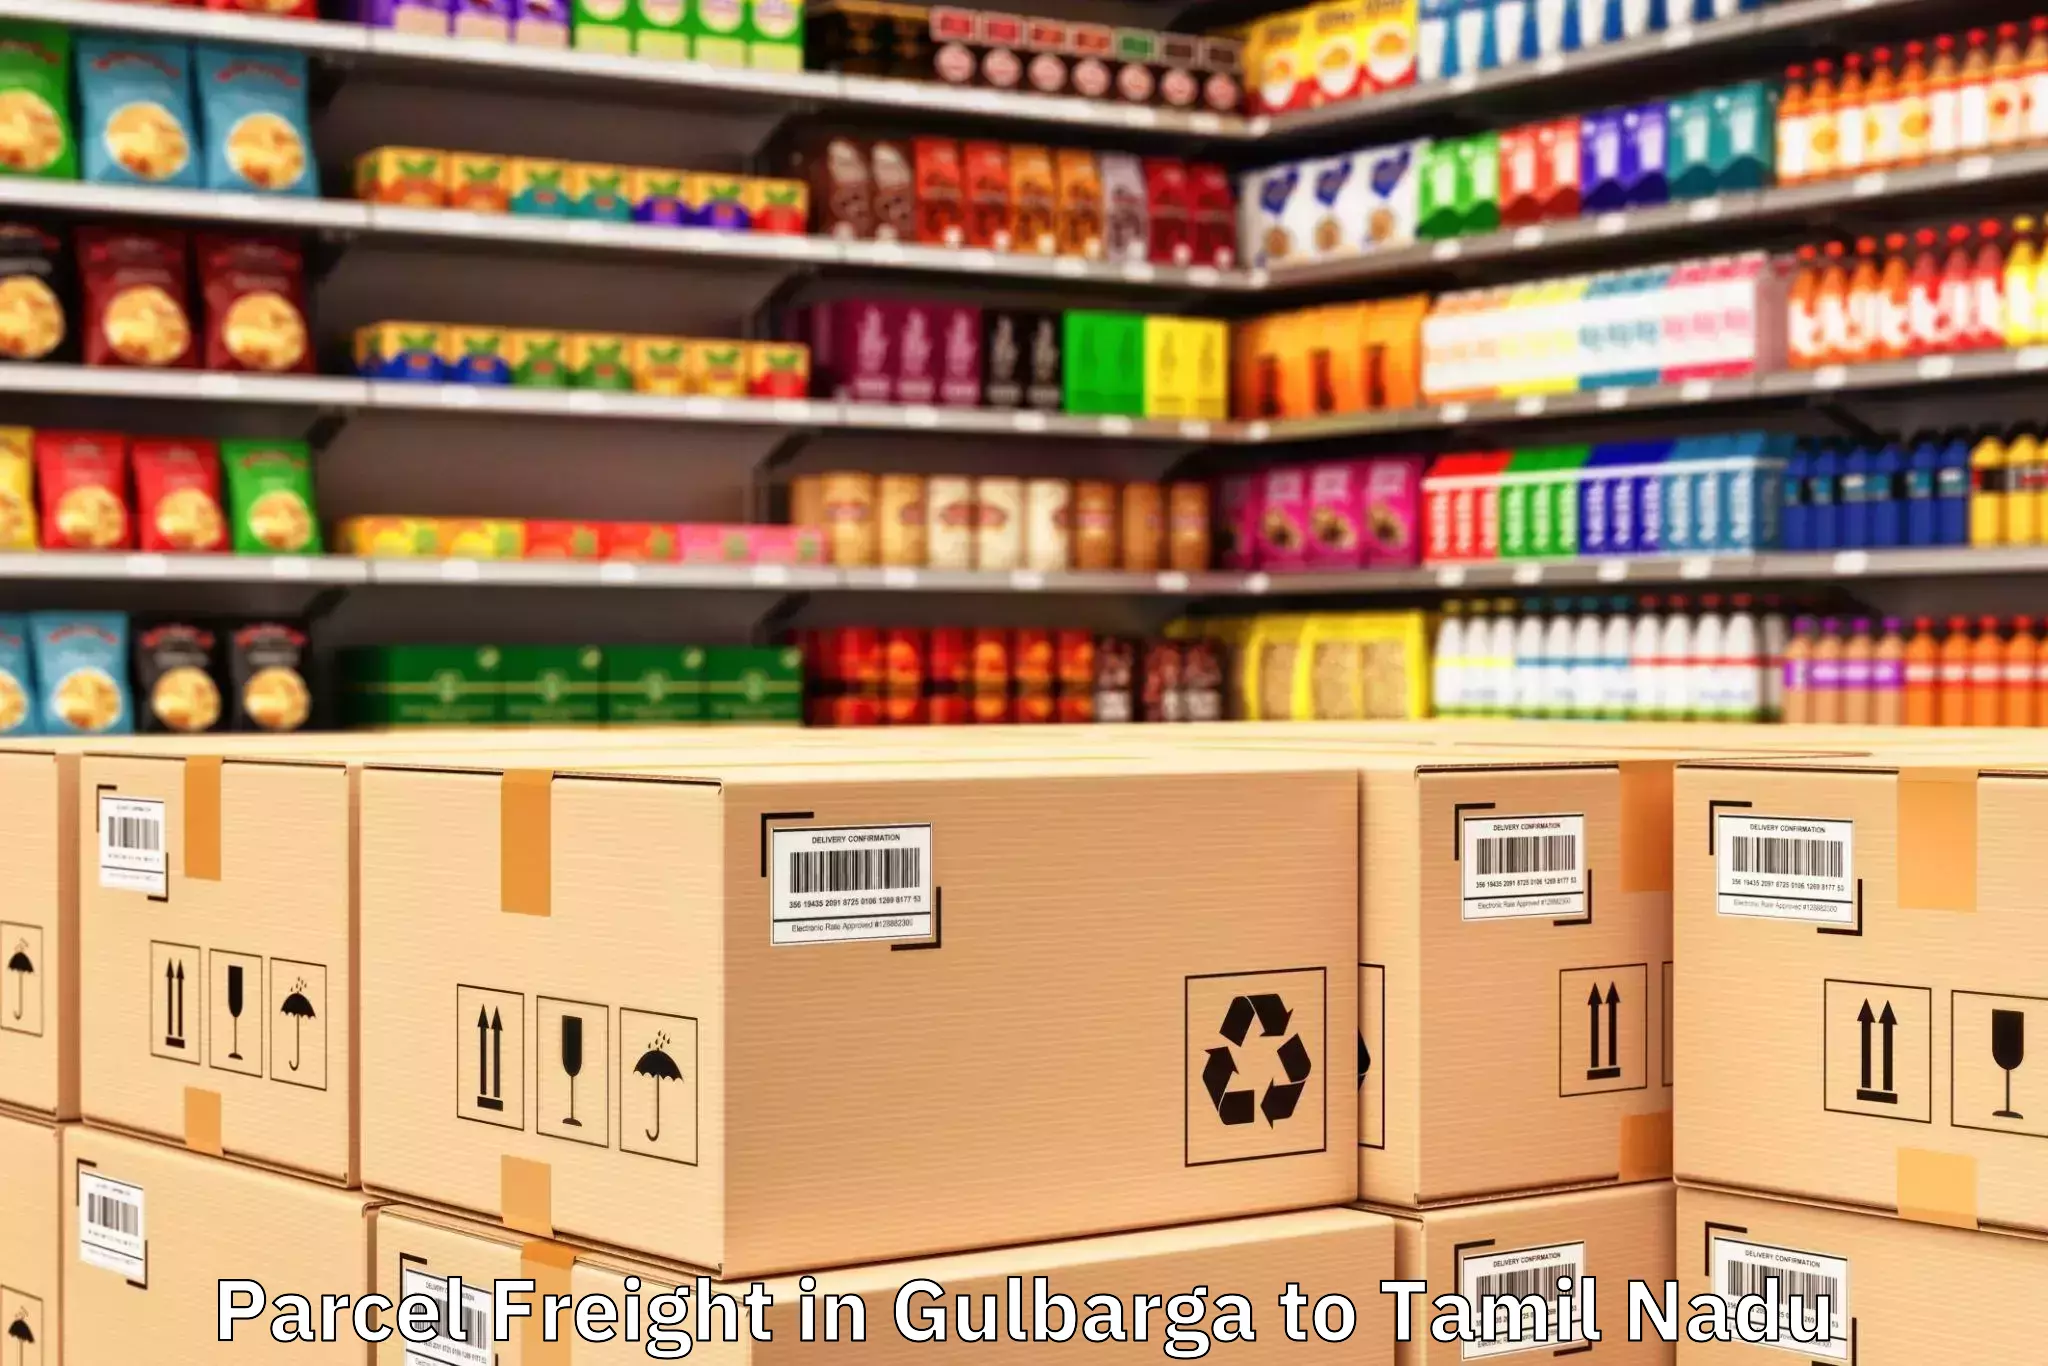 Top Gulbarga to Thiruthuraipoondi Parcel Freight Available